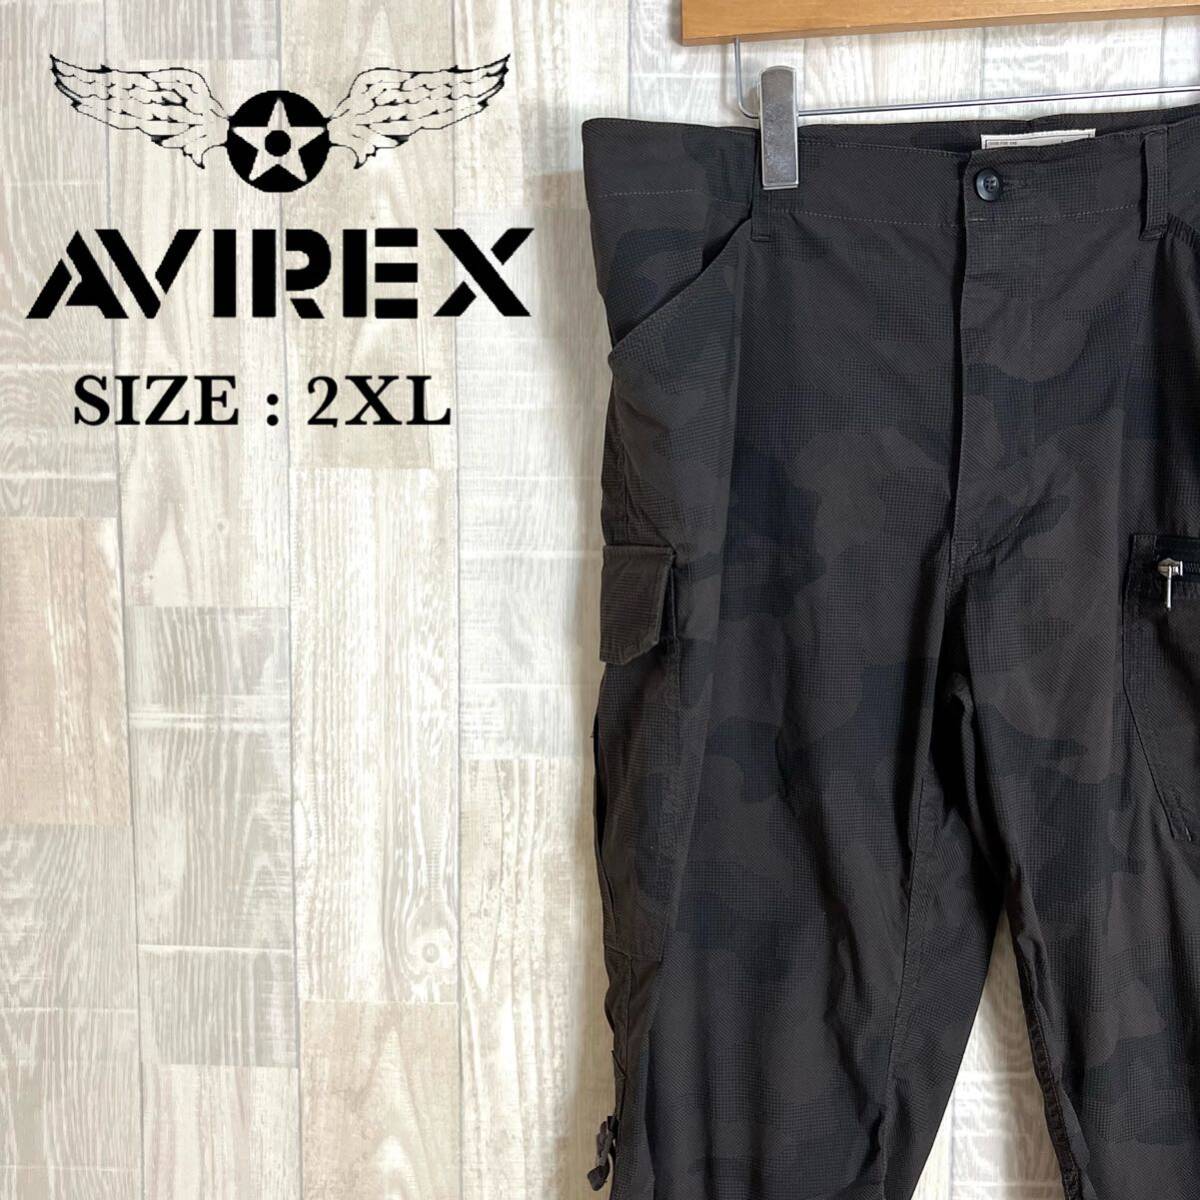 M3733 AVIREX Avirex the smallest stretch cargo pants 2XL size .. Brown camouflage pattern cropped pants height men's bottoms 